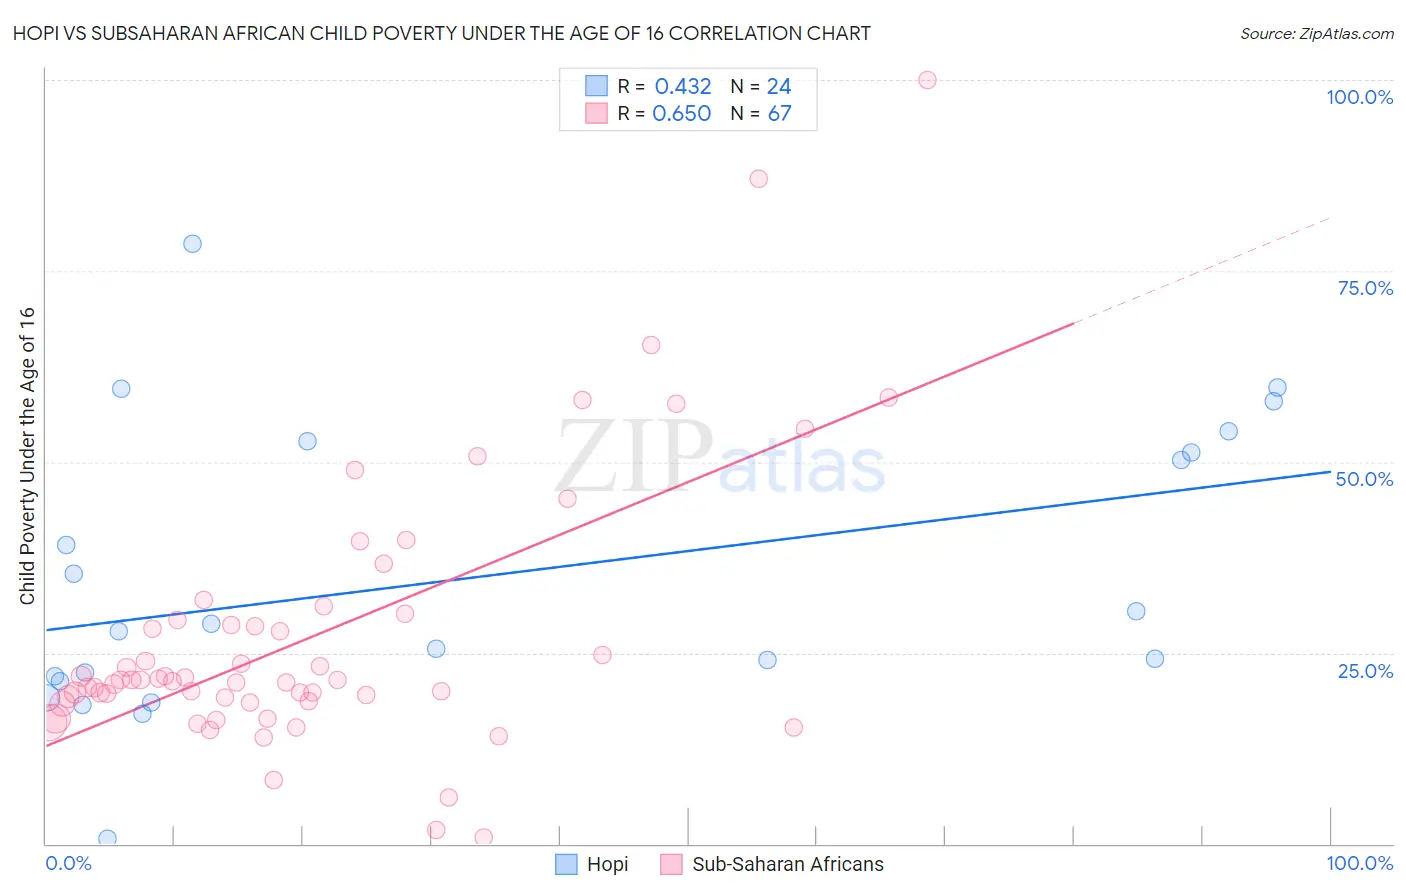 Hopi vs Subsaharan African Child Poverty Under the Age of 16